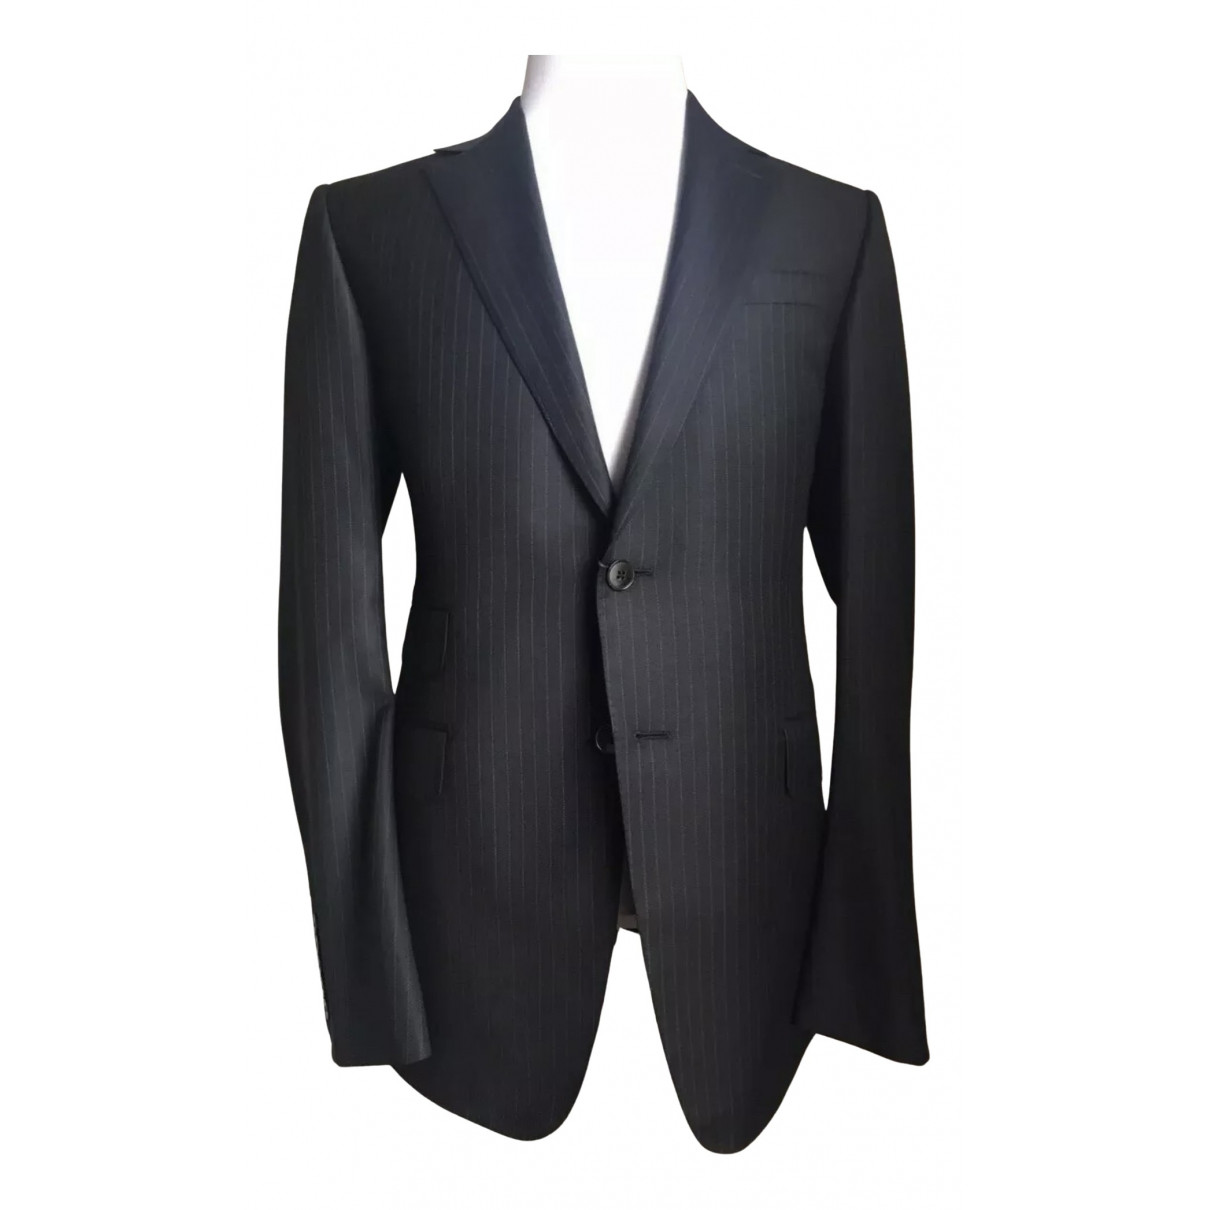 clothing Gucci suits for Male Wool 52 IT. Used condition